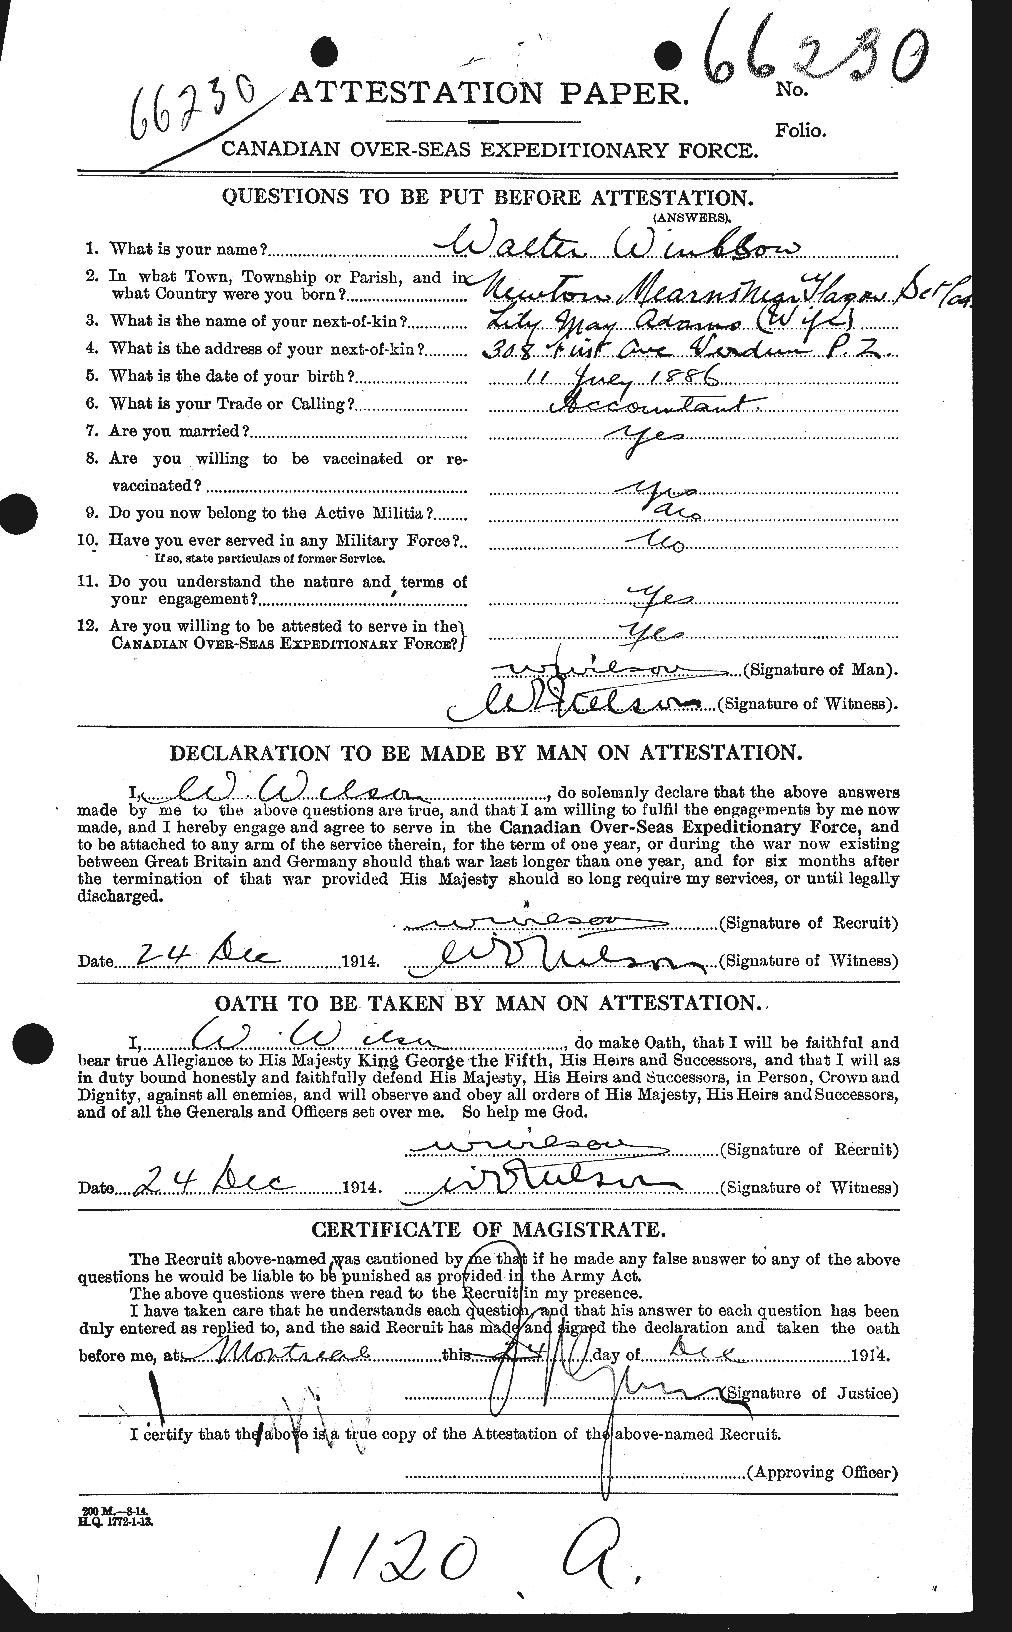 Personnel Records of the First World War - CEF 681736a